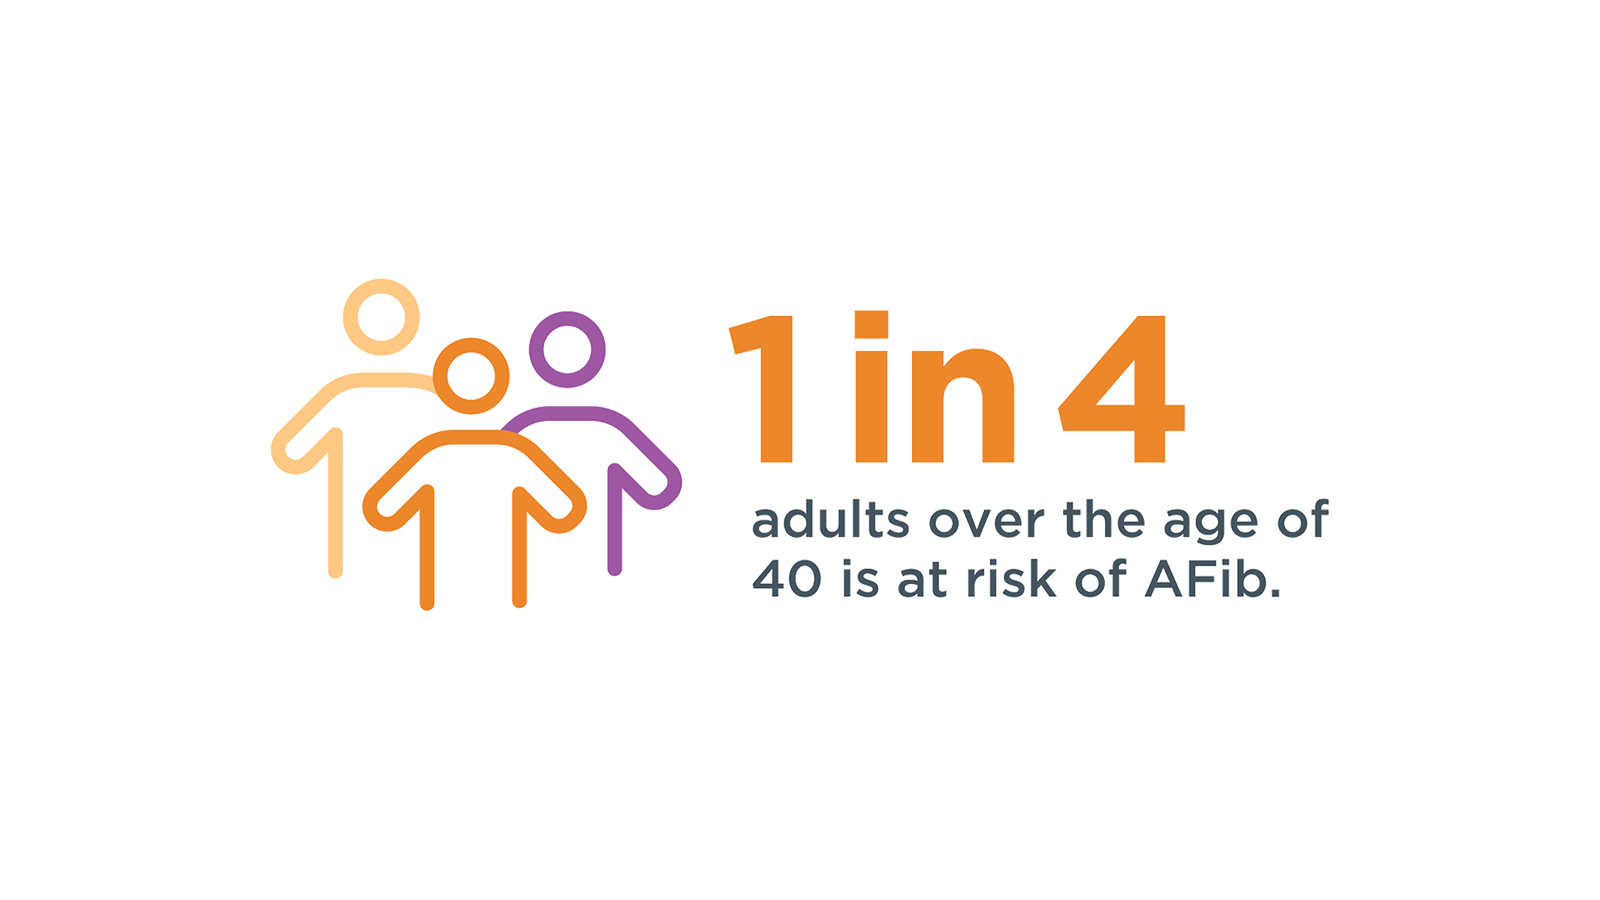 Infographic: Is AFib a common heart condition? 1 in 4 adults over the age of 40 is at risk of AFib.